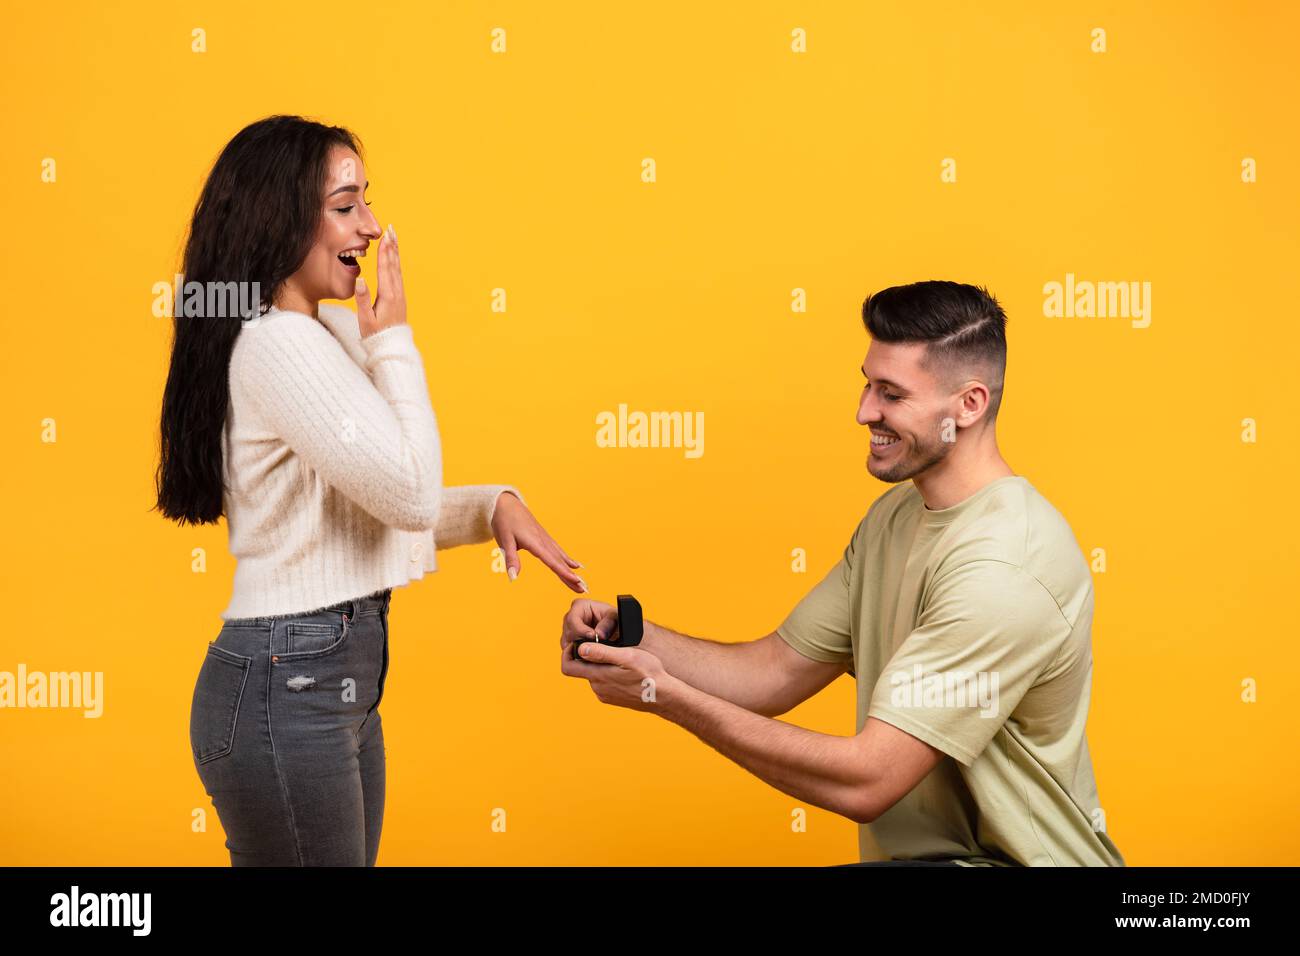 Glad millennial arab man kneeling, holding ring box with jewelry, proposing to surprised lady Stock Photo